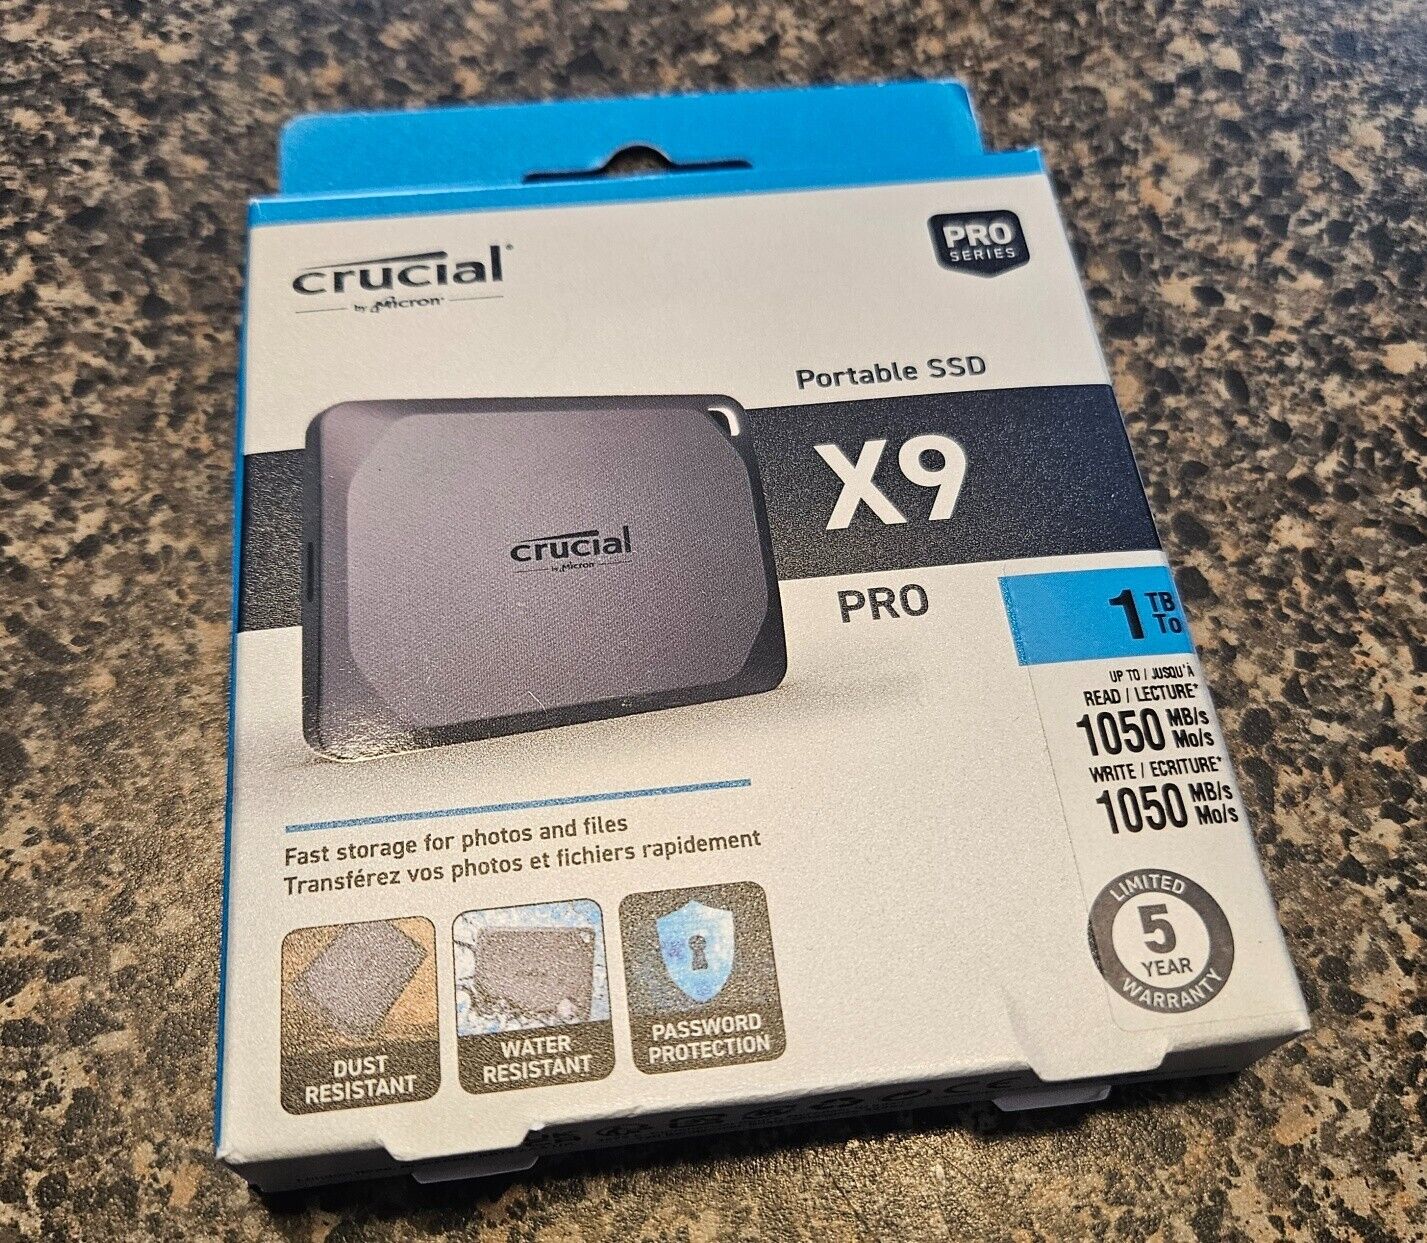 Crucial X9 Pro USB 3.2 Type-C Portable External SSD #CT1000X9PROSSD9 NEW SEALED